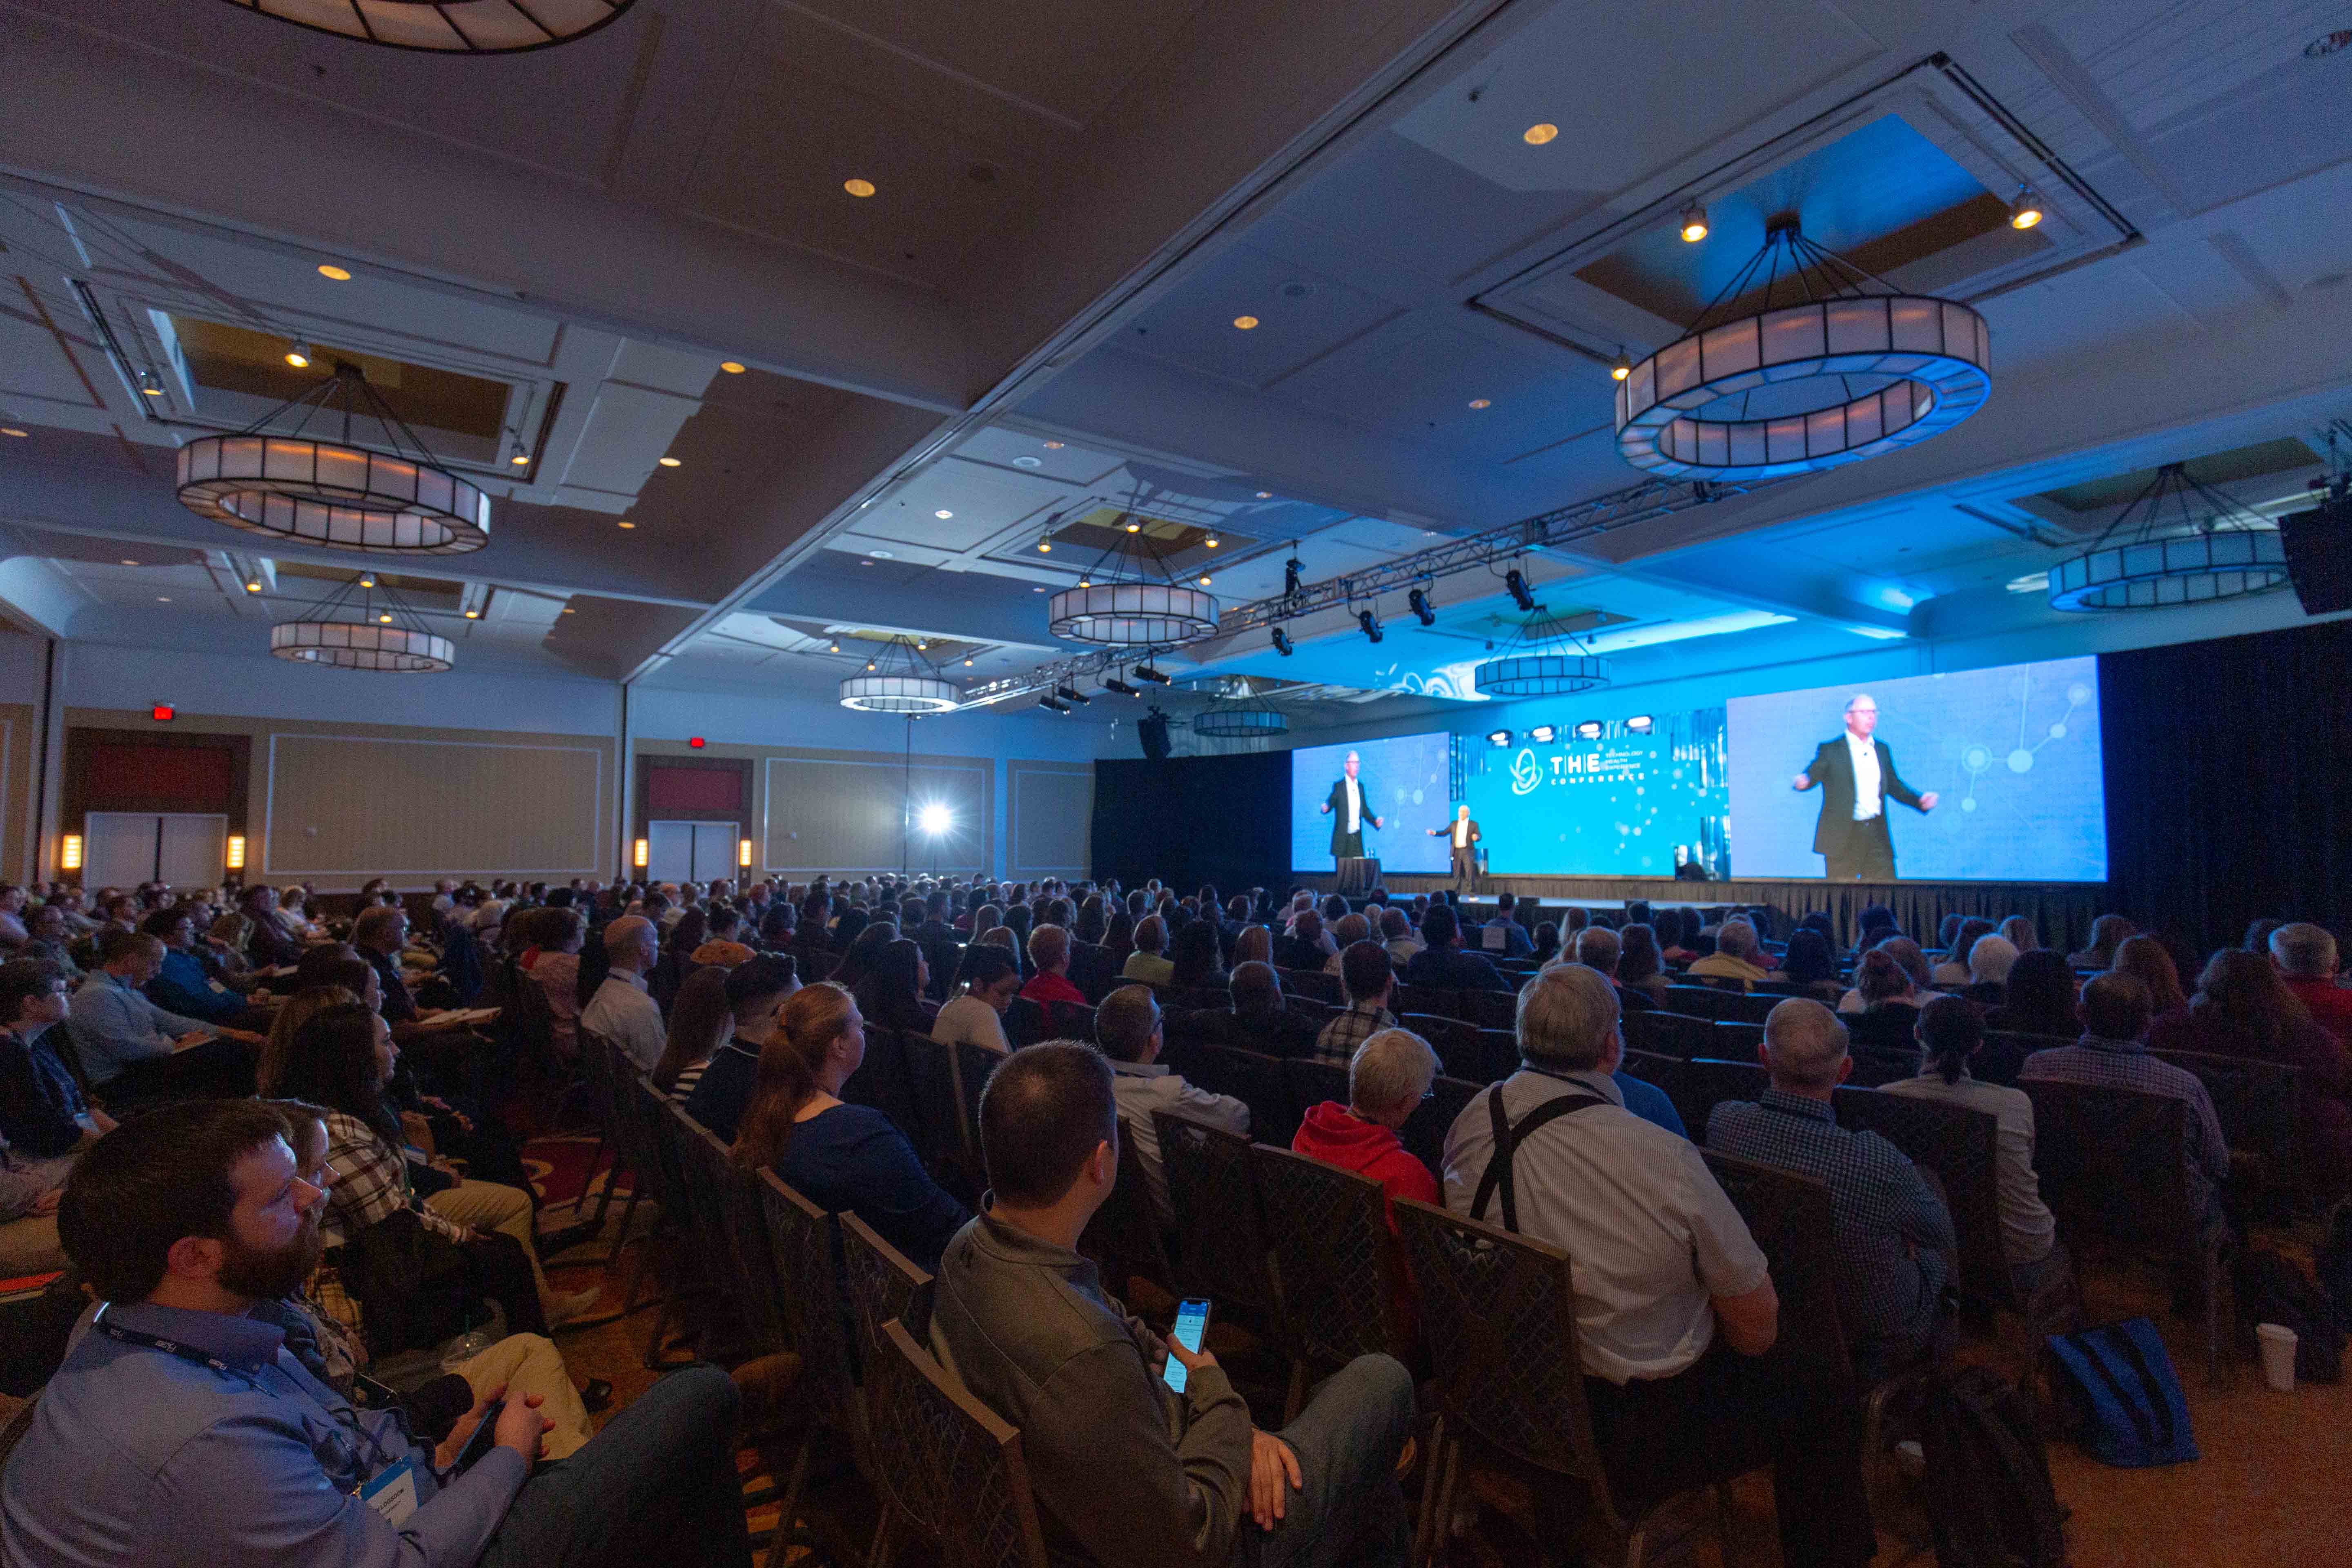 The Top 5 Pharmacy Conferences Your Organization Should Attend in 2023